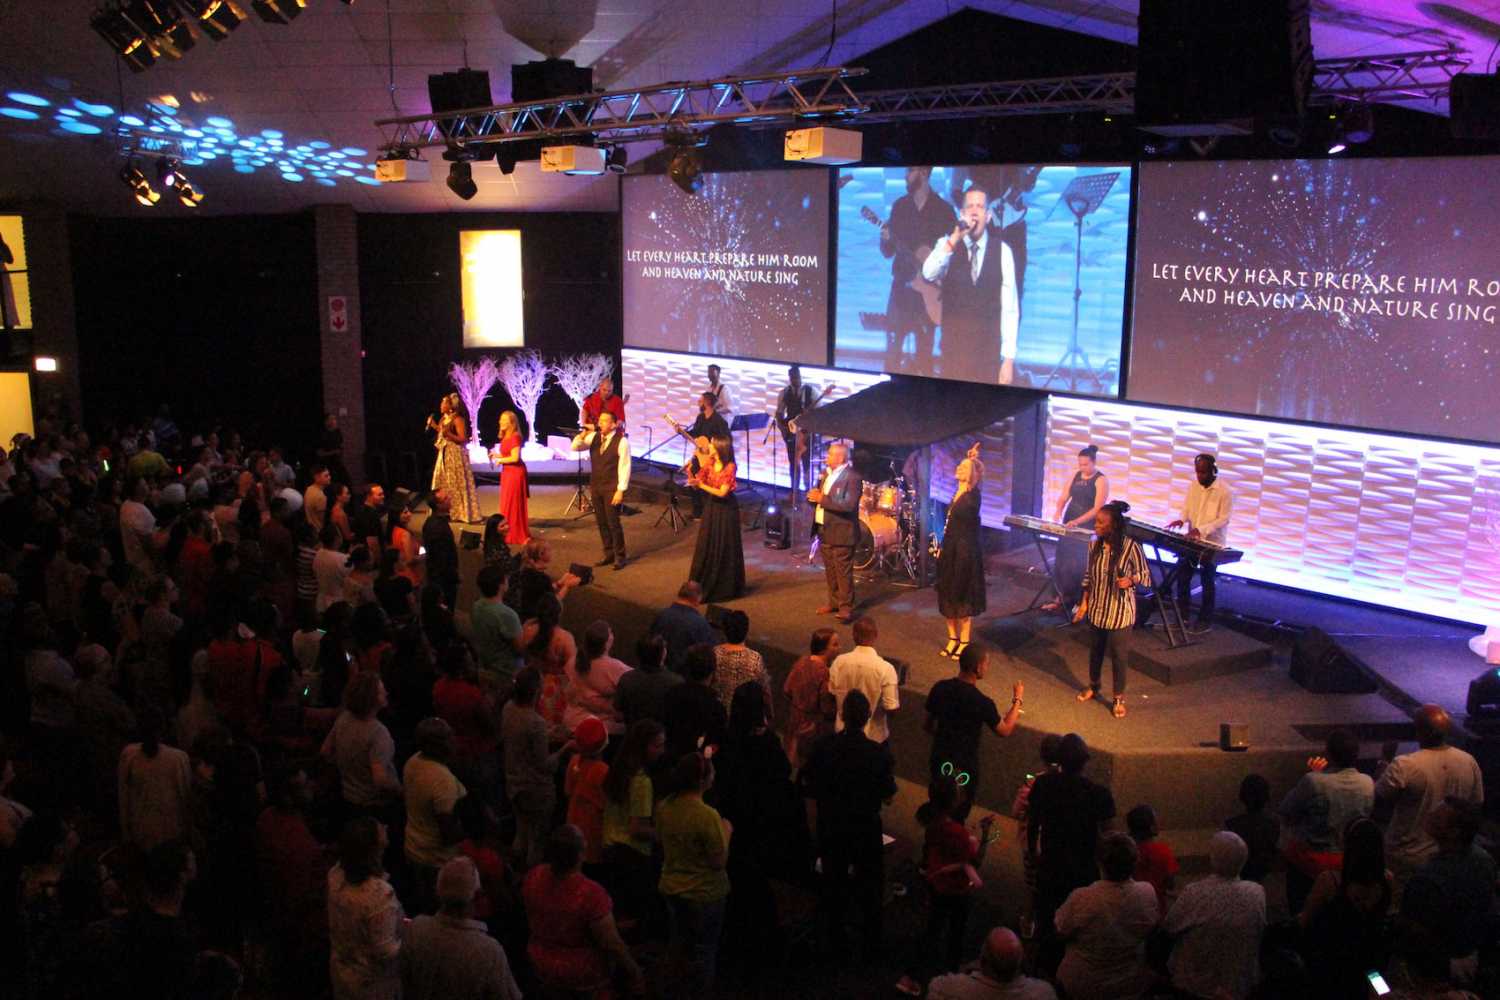 Thrive Church has invested in an L-Acoustics audio system installed by DWR Distribution